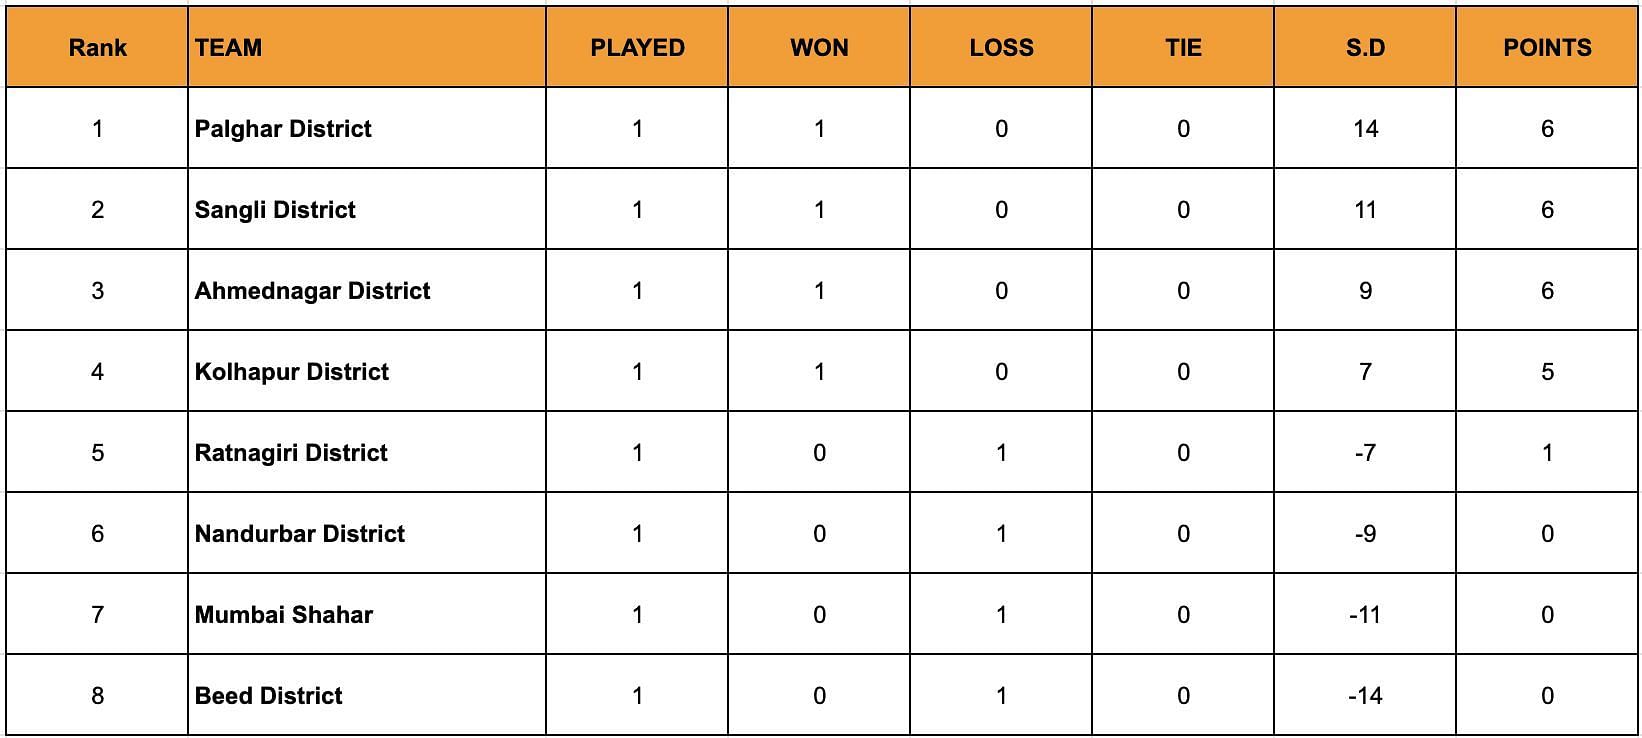 A look at the standings after the conclusion of Day 15.